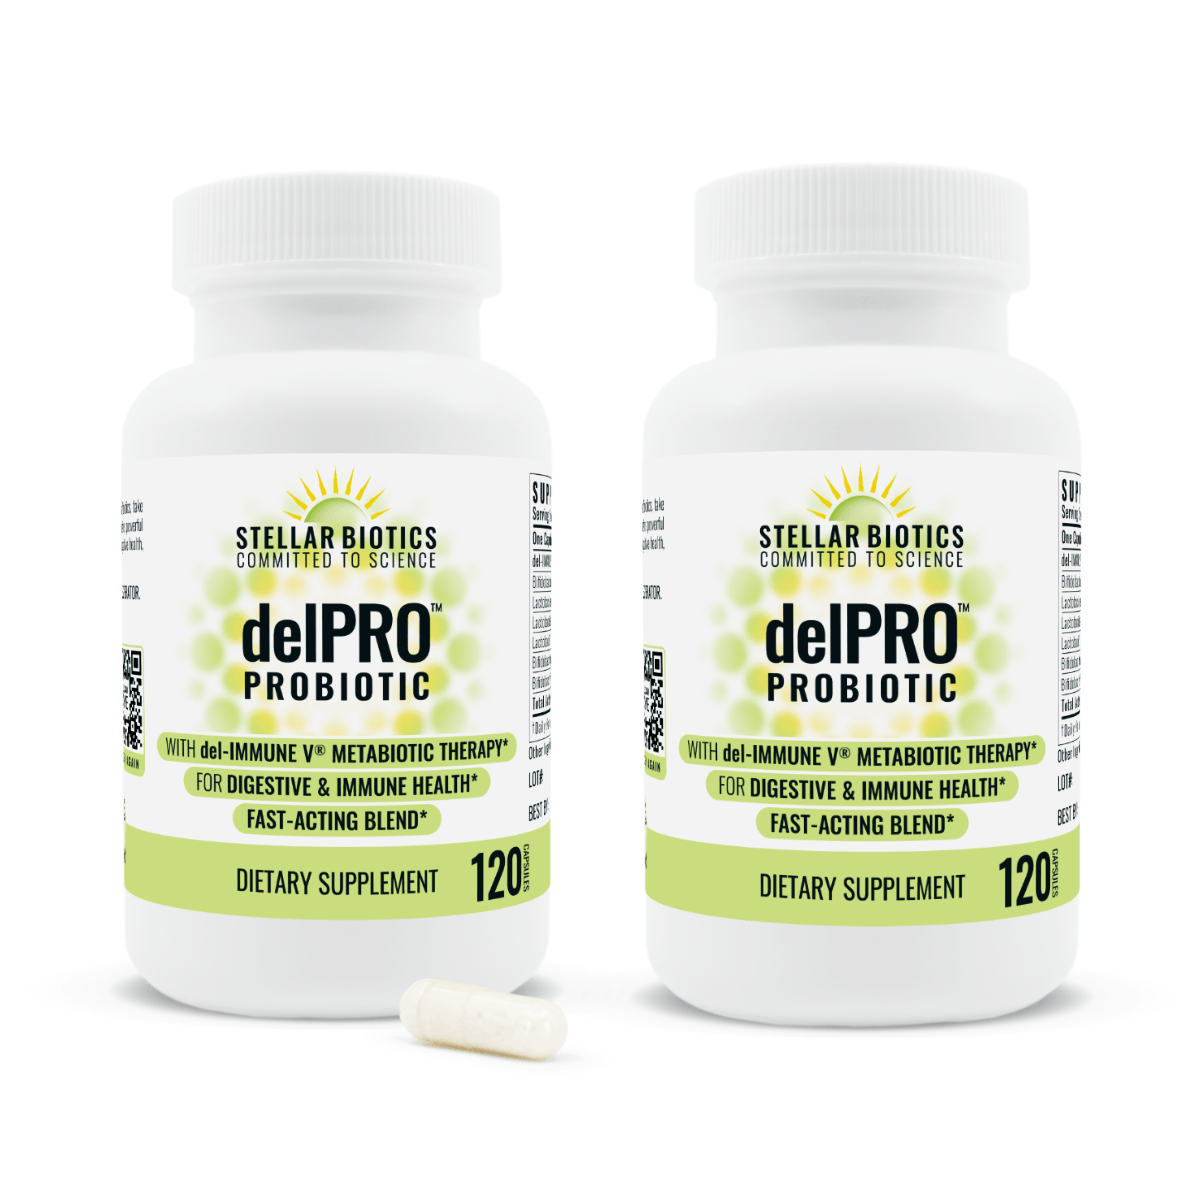 Restore bundle contains two 120-capsule bottles of the metabiotic-infused probiotic, delPRO™